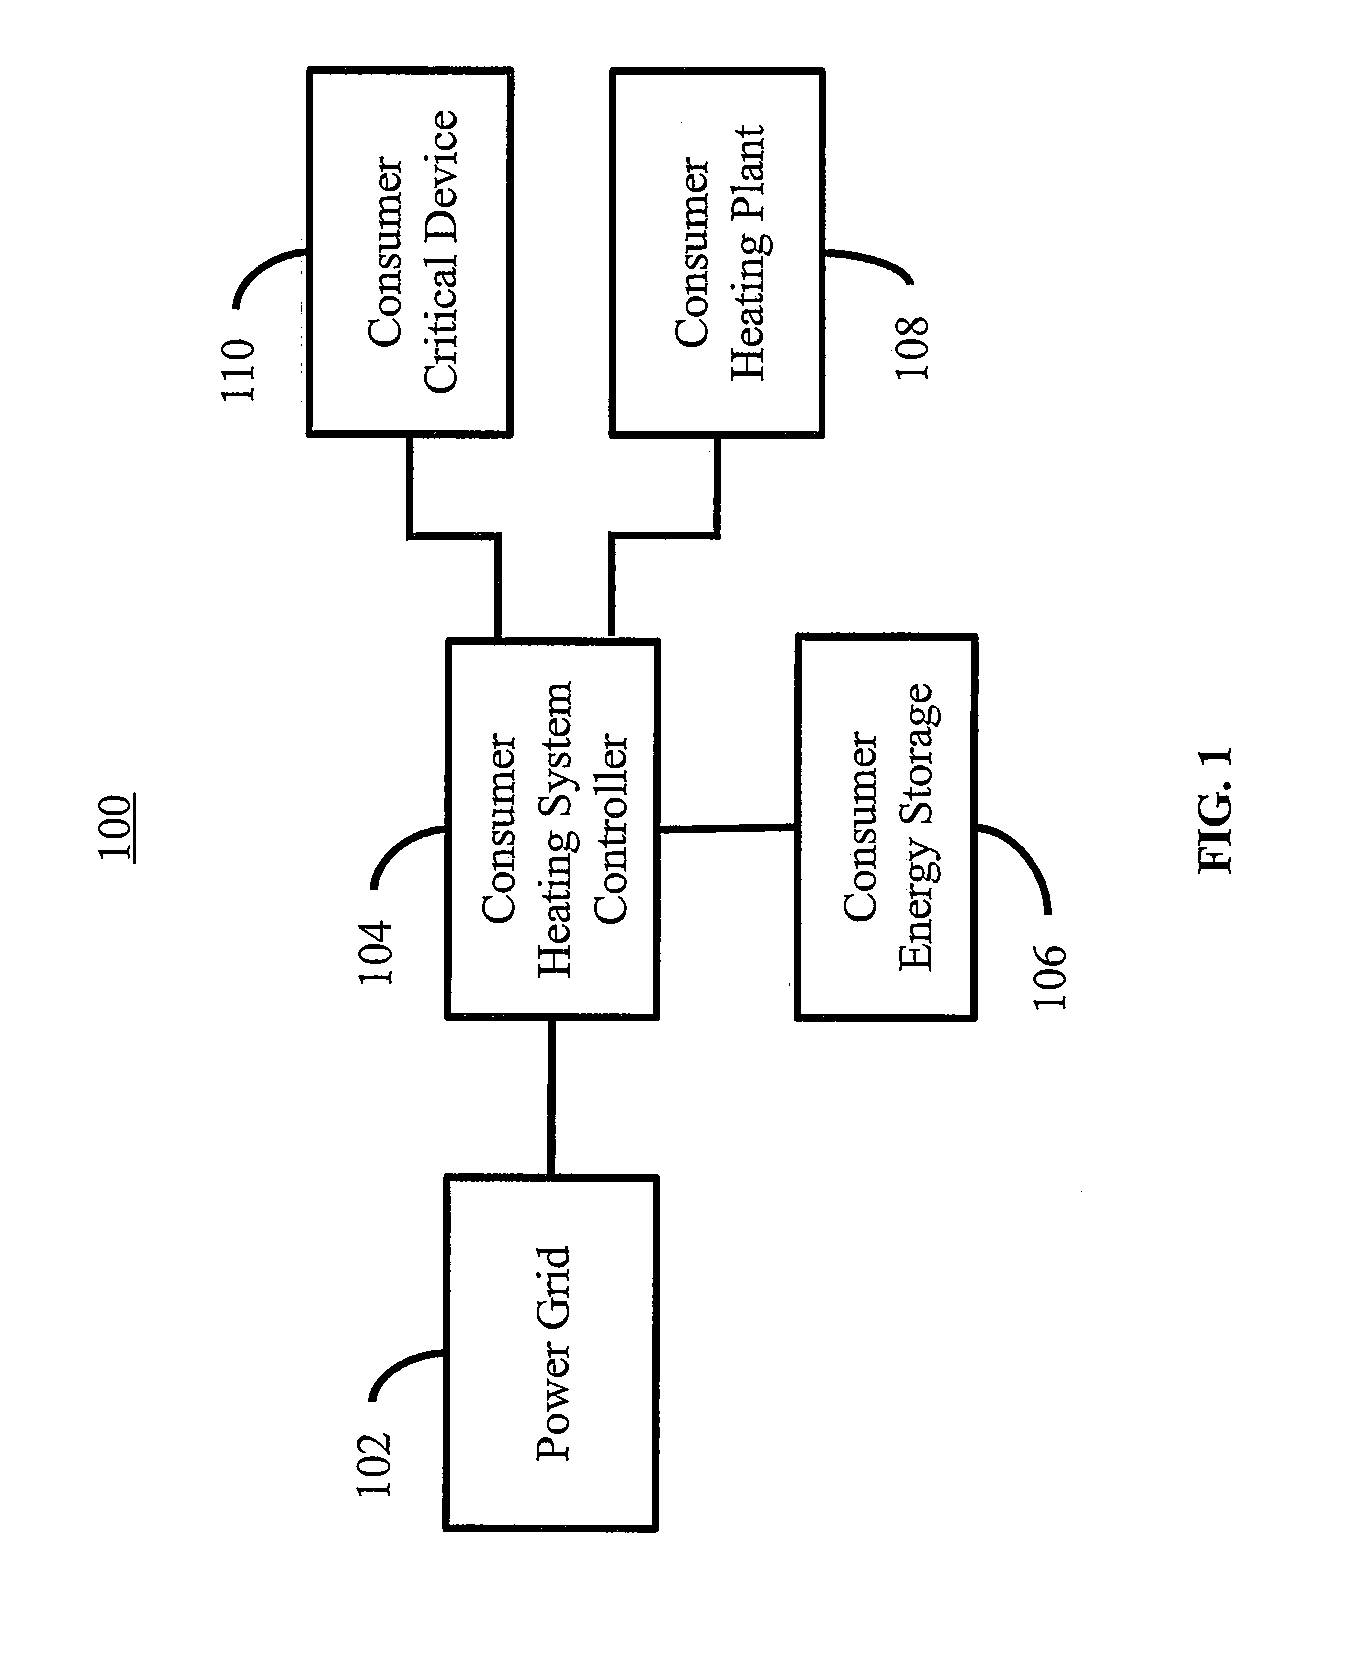 System and Methods for Controlling a Supply of Electric Energy